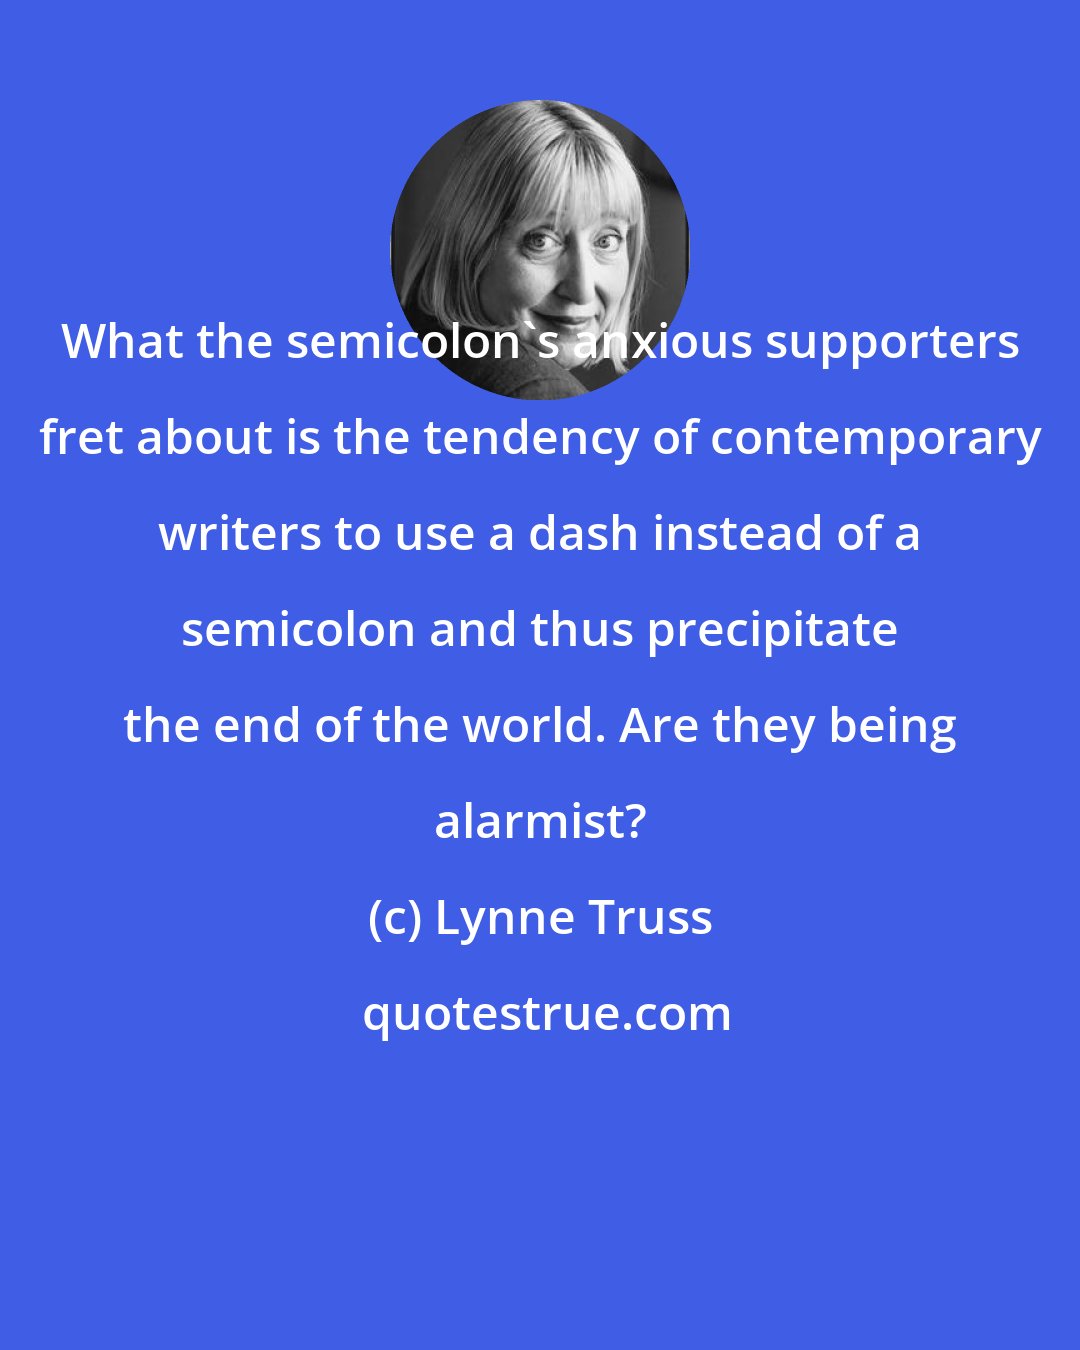 Lynne Truss: What the semicolon's anxious supporters fret about is the tendency of contemporary writers to use a dash instead of a semicolon and thus precipitate the end of the world. Are they being alarmist?